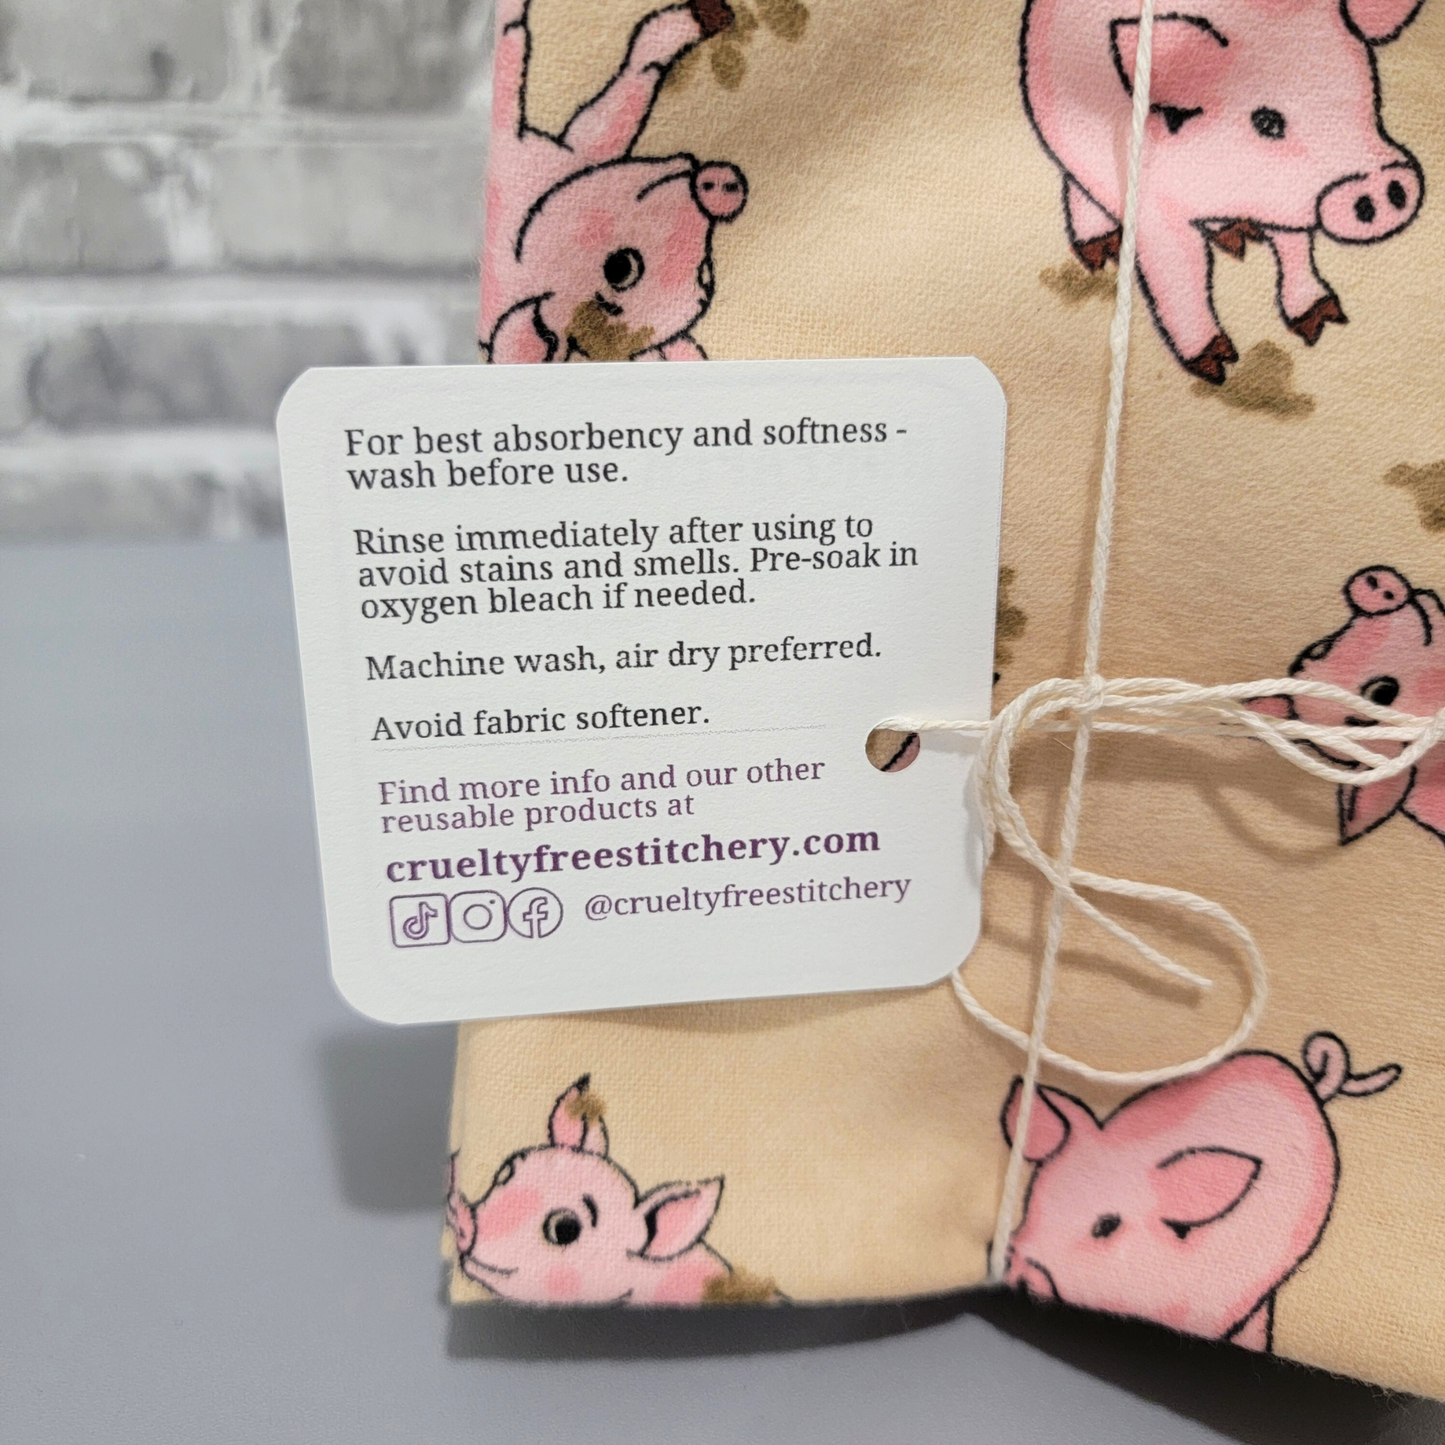 The back of the tag with care instructions. Can be found in the item description.